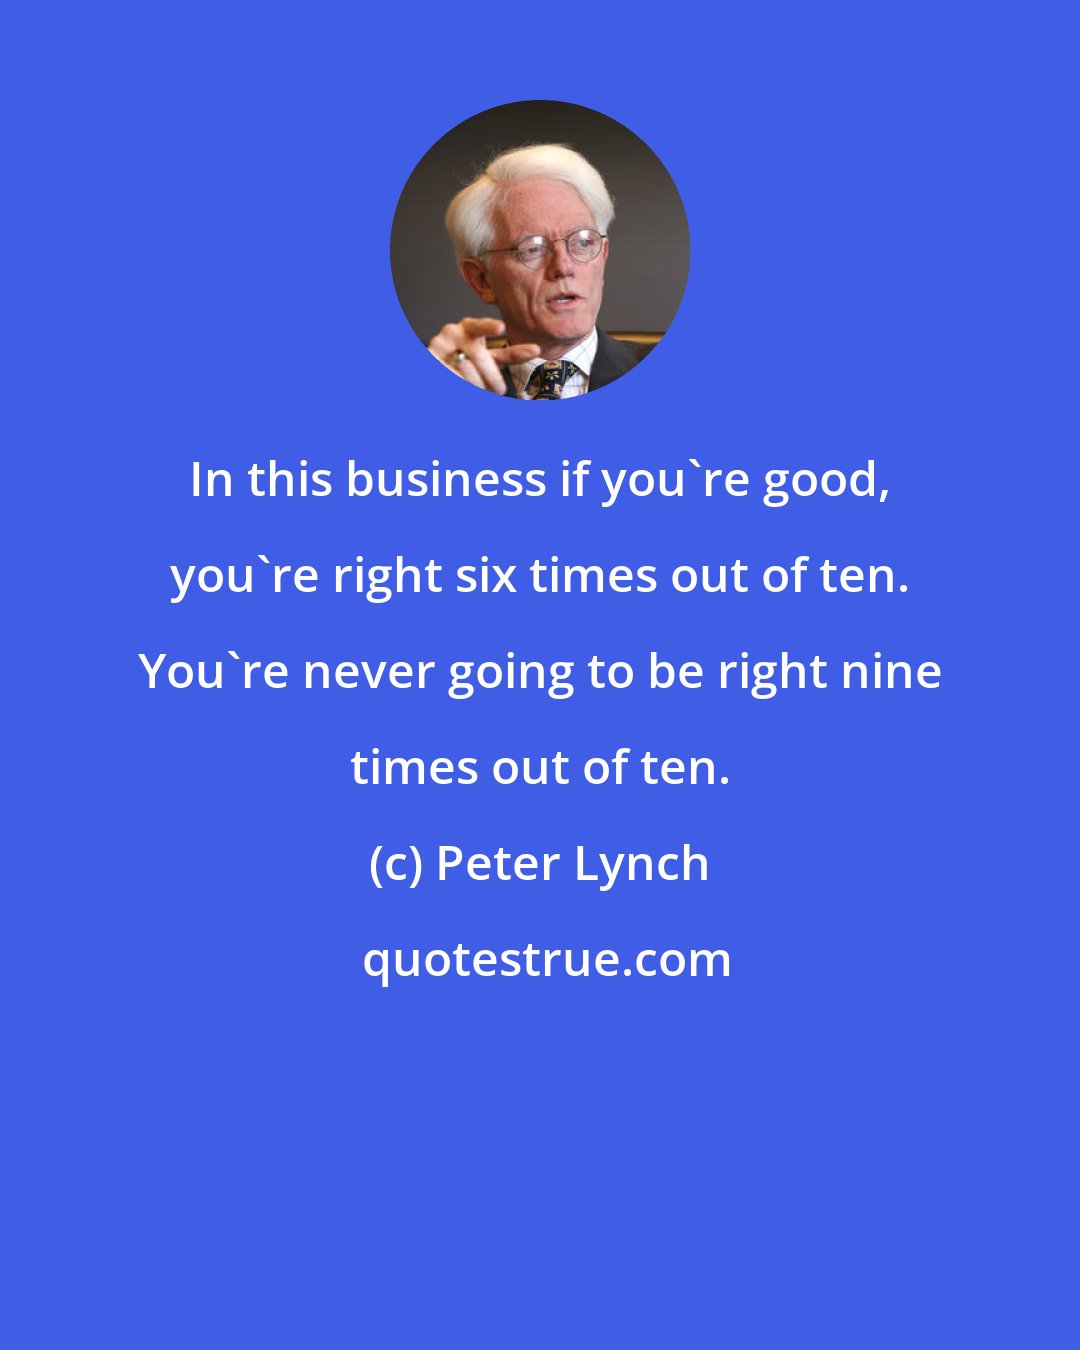 Peter Lynch: In this business if you're good, you're right six times out of ten. You're never going to be right nine times out of ten.